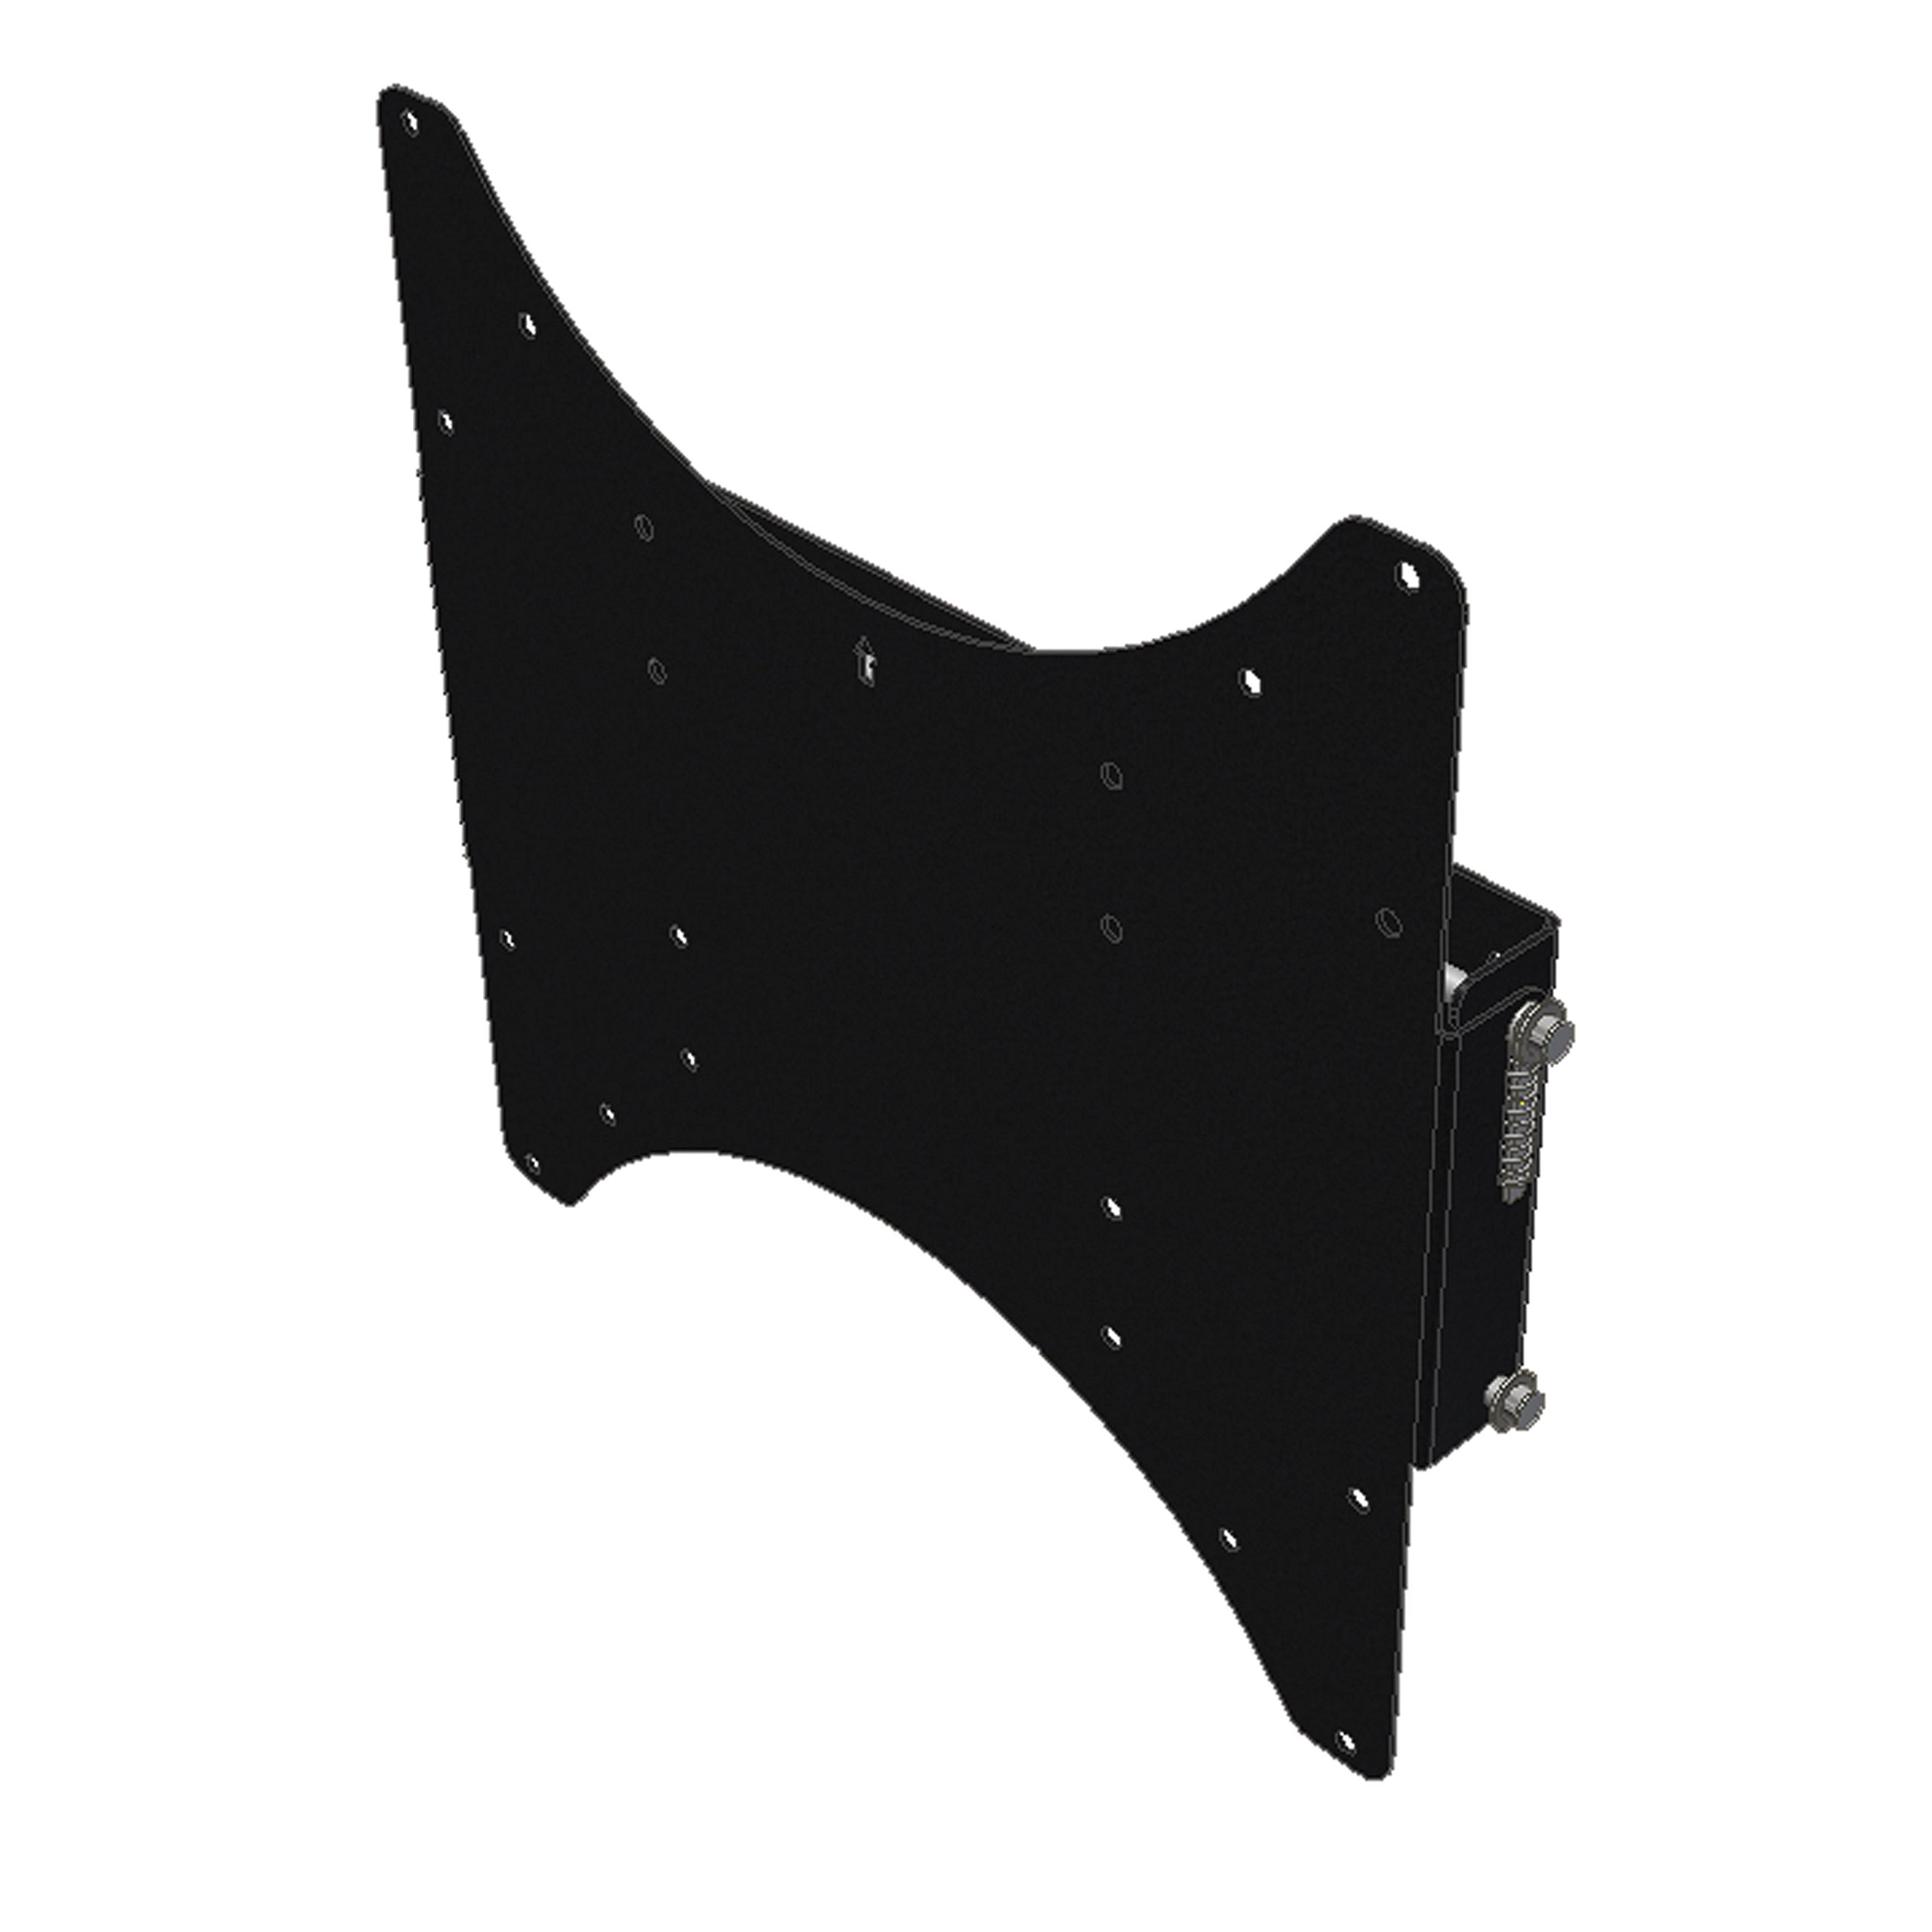 MORryde Snap-In TV Wall Mount